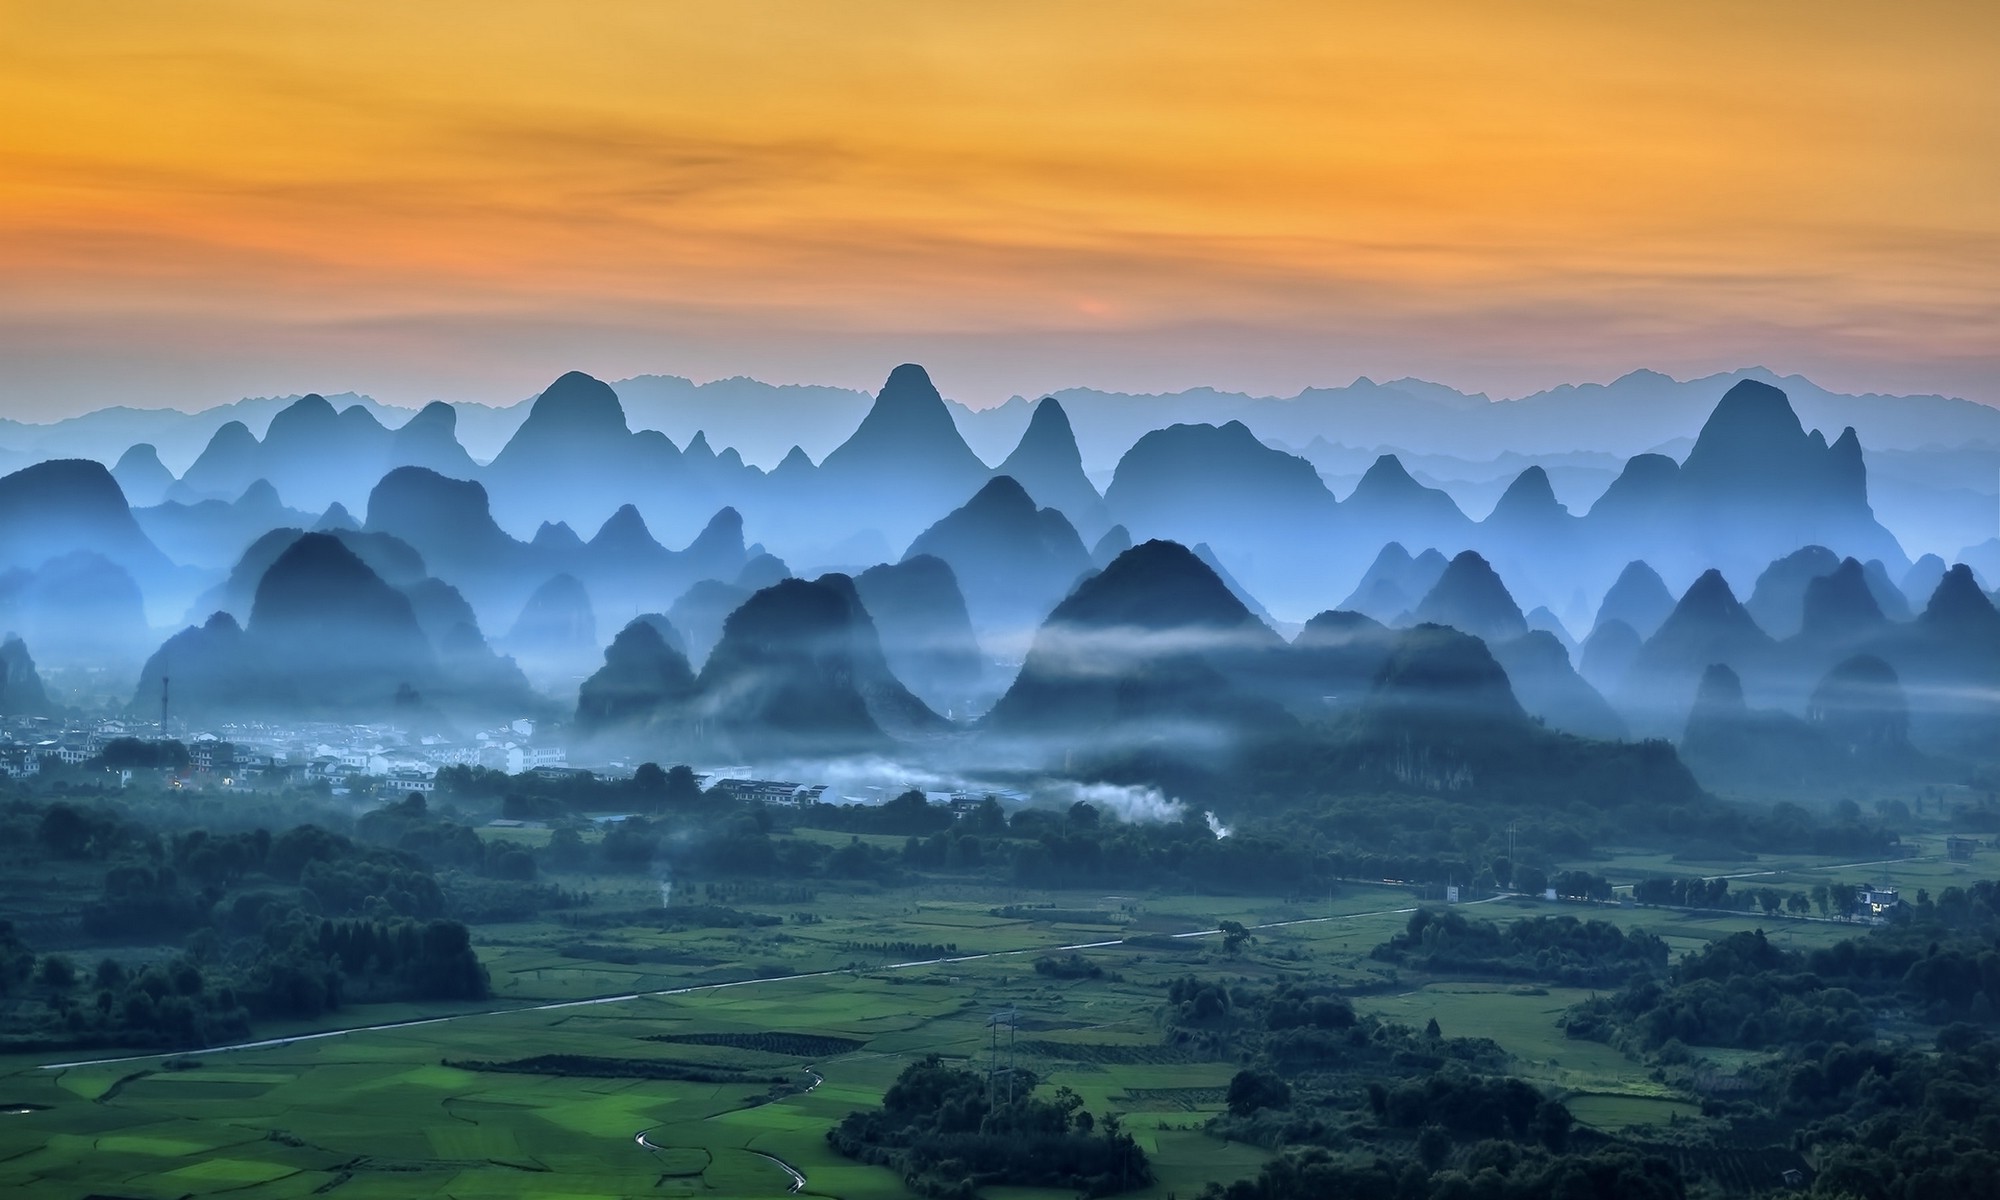 nature, Landscape, Mist, Mountain, Field, Morning, China, Trees, City Wallpaper